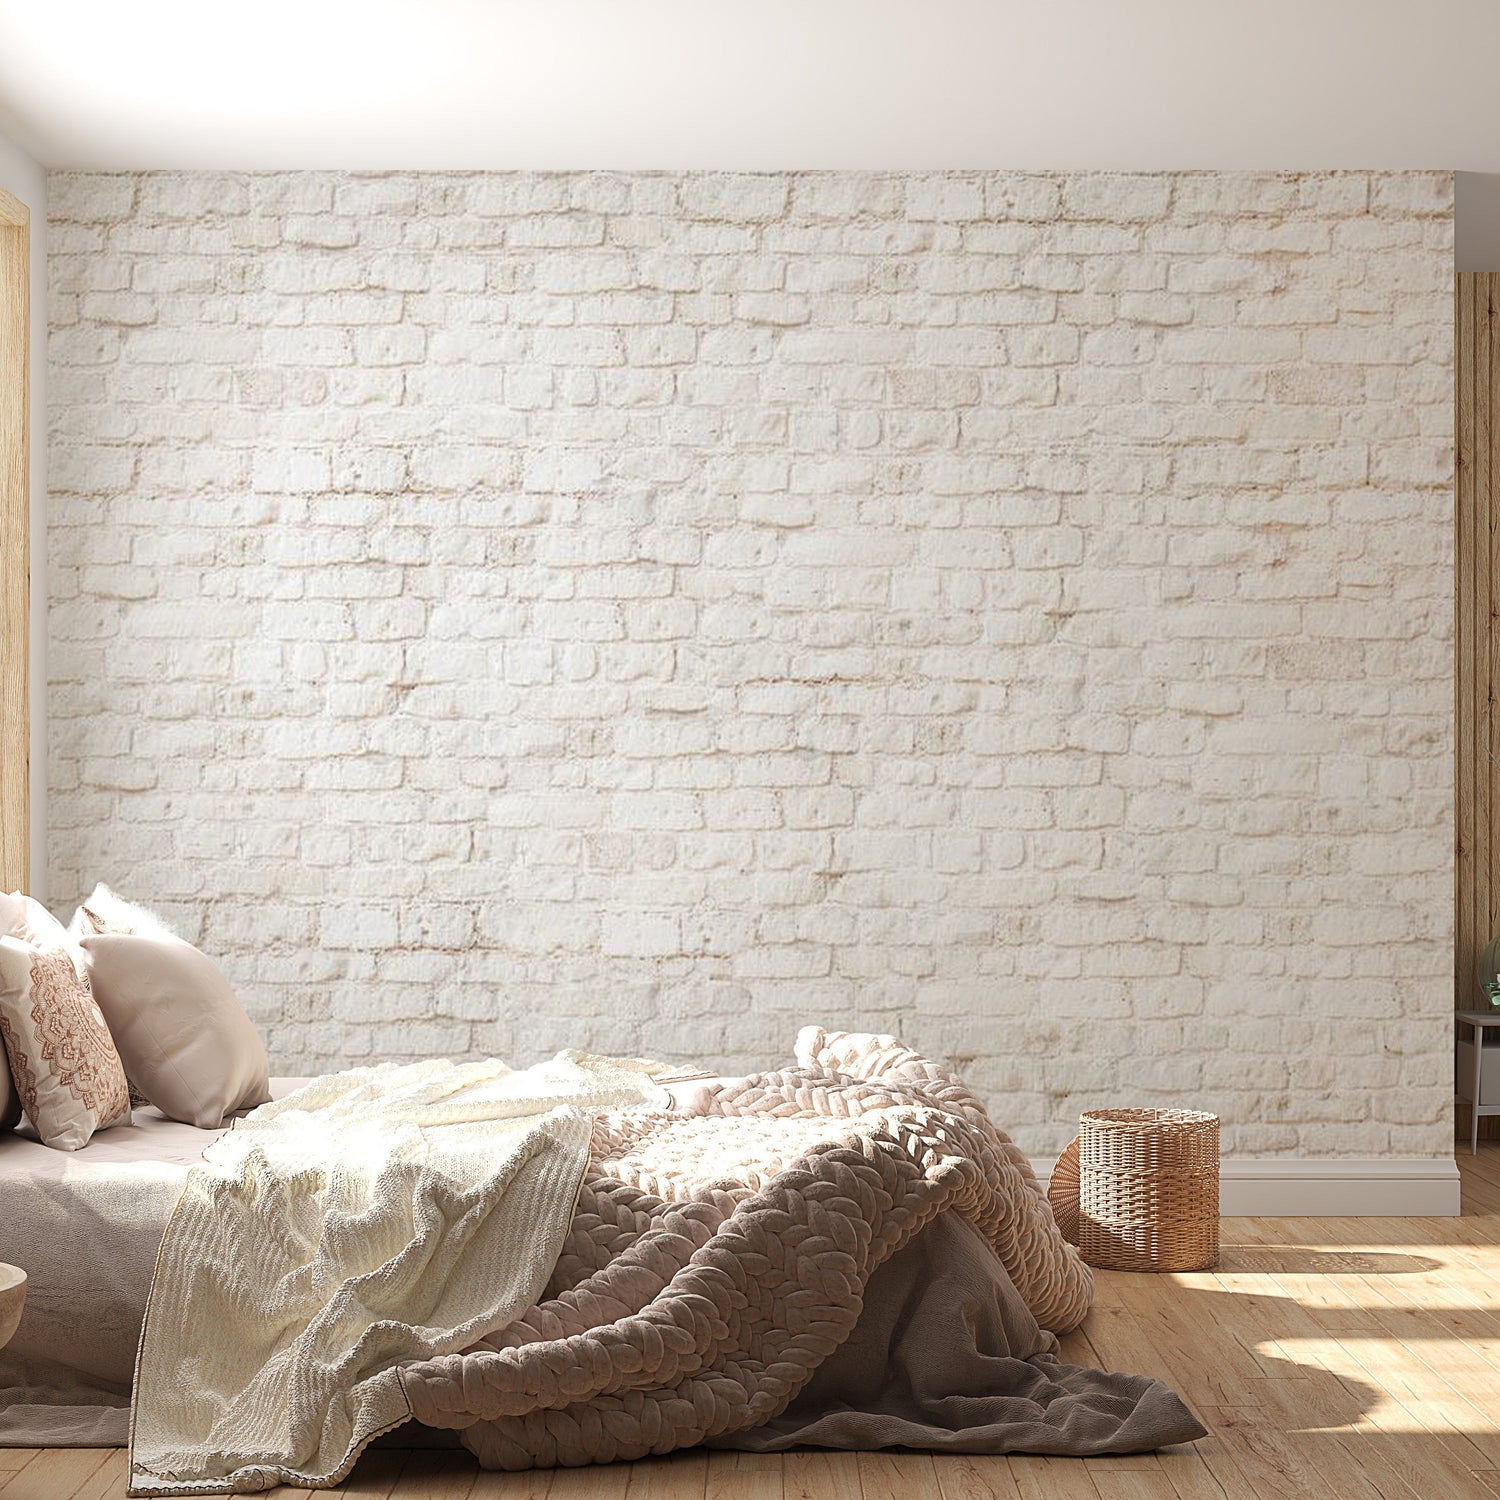 Peel & Stick Wall Mural - White Painted Brick Wall - Removable Wall Decals